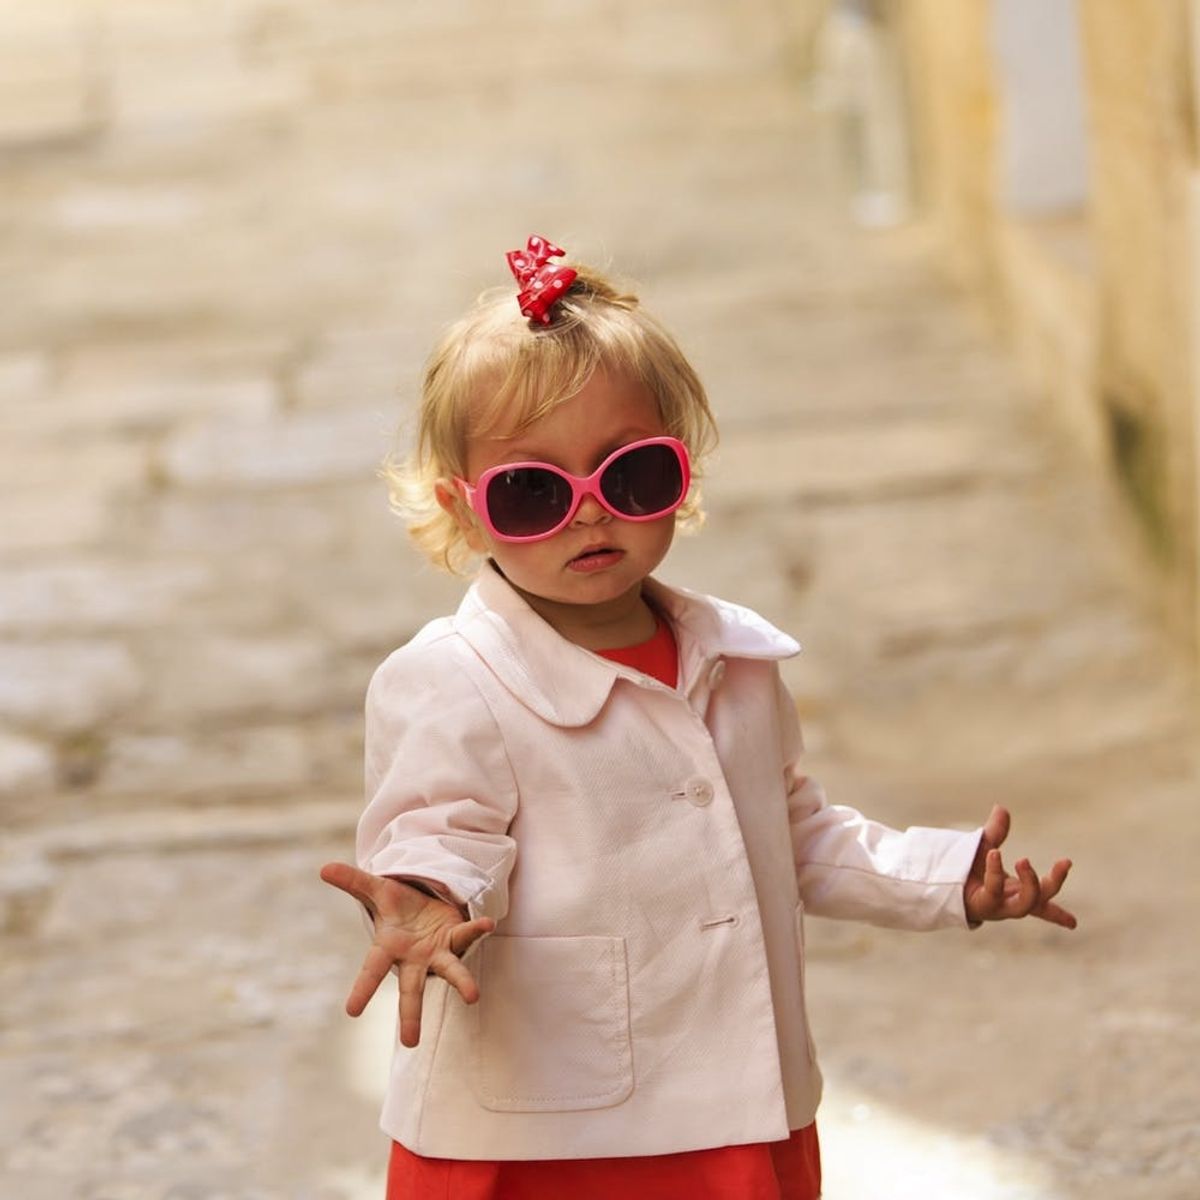 10 Colorful Baby Names Inspired by Fall Fashion